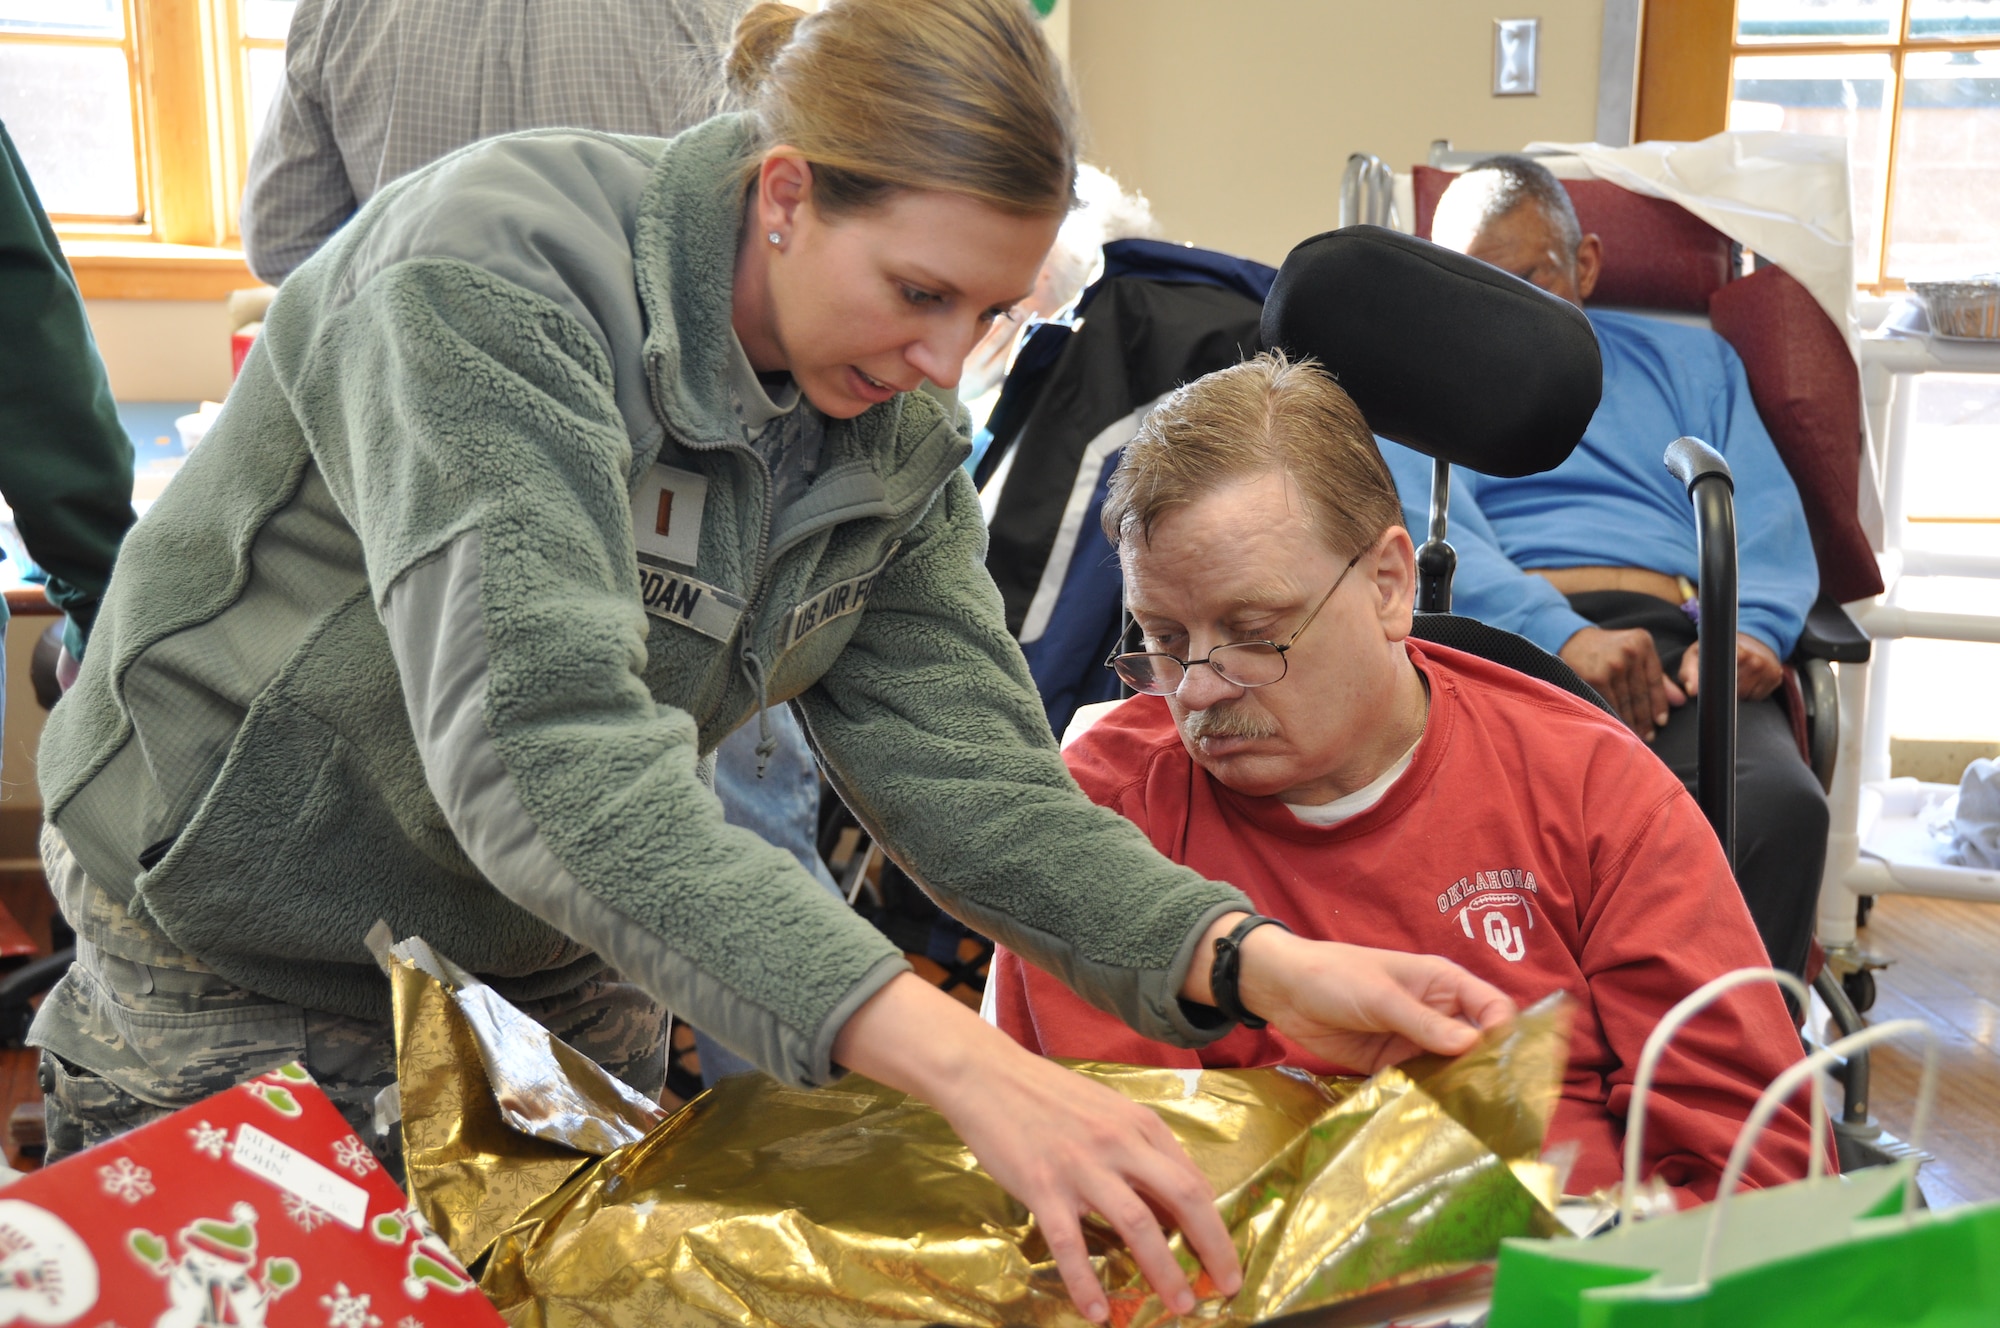 2nd Lt. Cristi Jordan, a 507th Operations Support Flight intelligence analyst helps Robert McCarthy, a veteran at the Norman Veterans Center, open a gift at the annual Christmas Party recently.  Over $4,000 was raised by members of the 507th Air Refueling Wing for gifts to be donated to the veterans.  Members of the 507th have been donating gifts since the center opened in 1996.  (Photo by Senior Airman Mark Hybers)